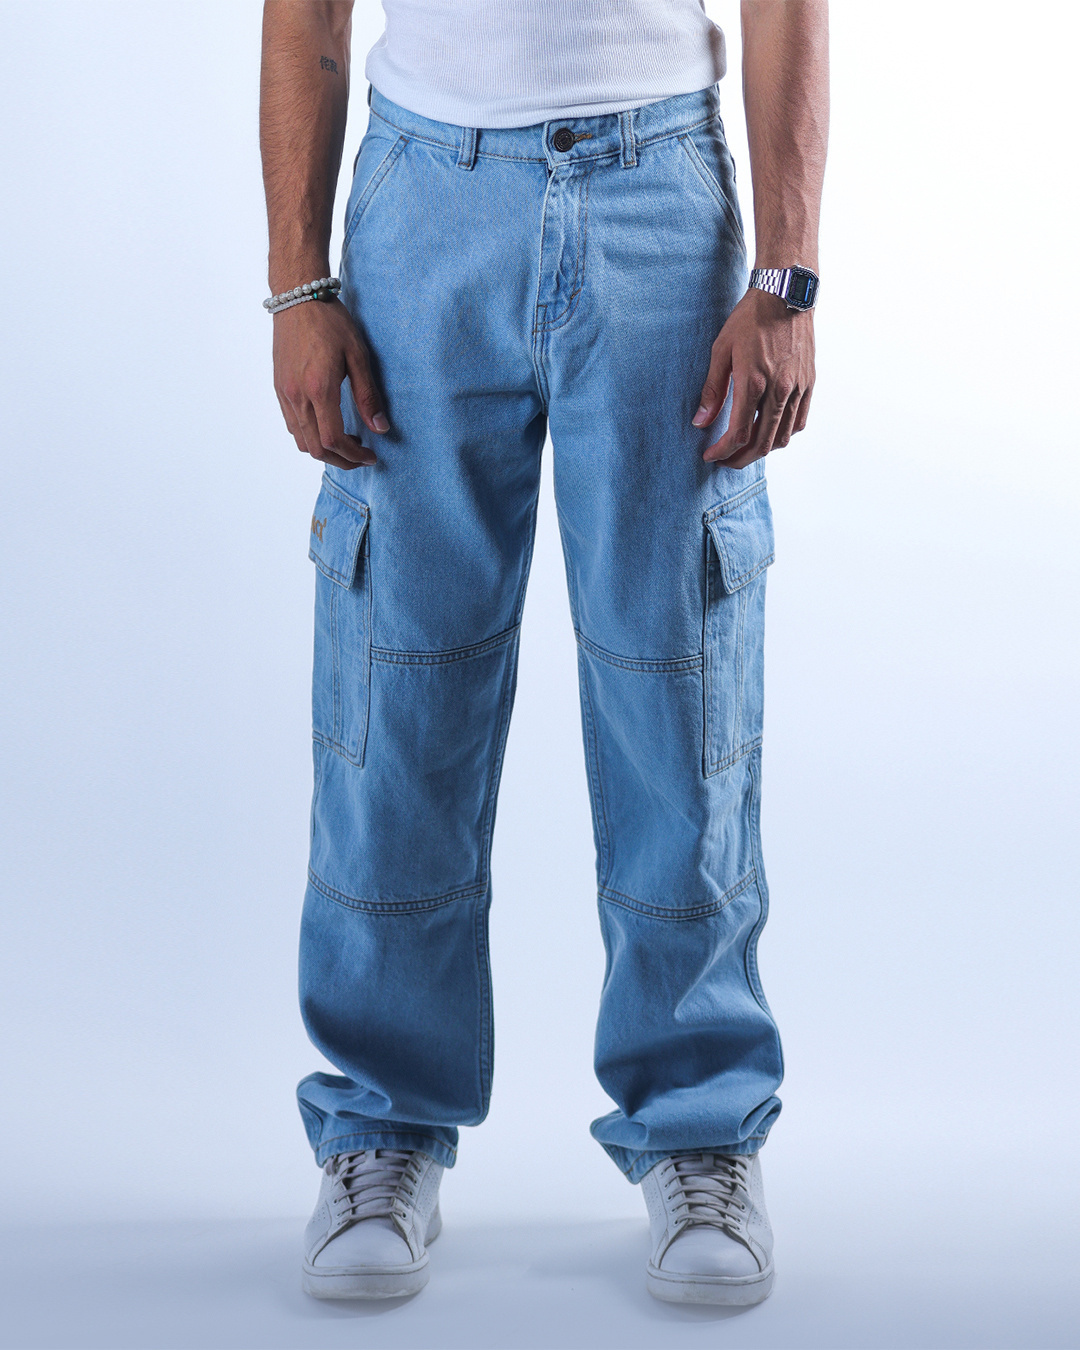 Buy Men's Light Blue Relaxed Fit Cargo Jeans Online at Bewakoof